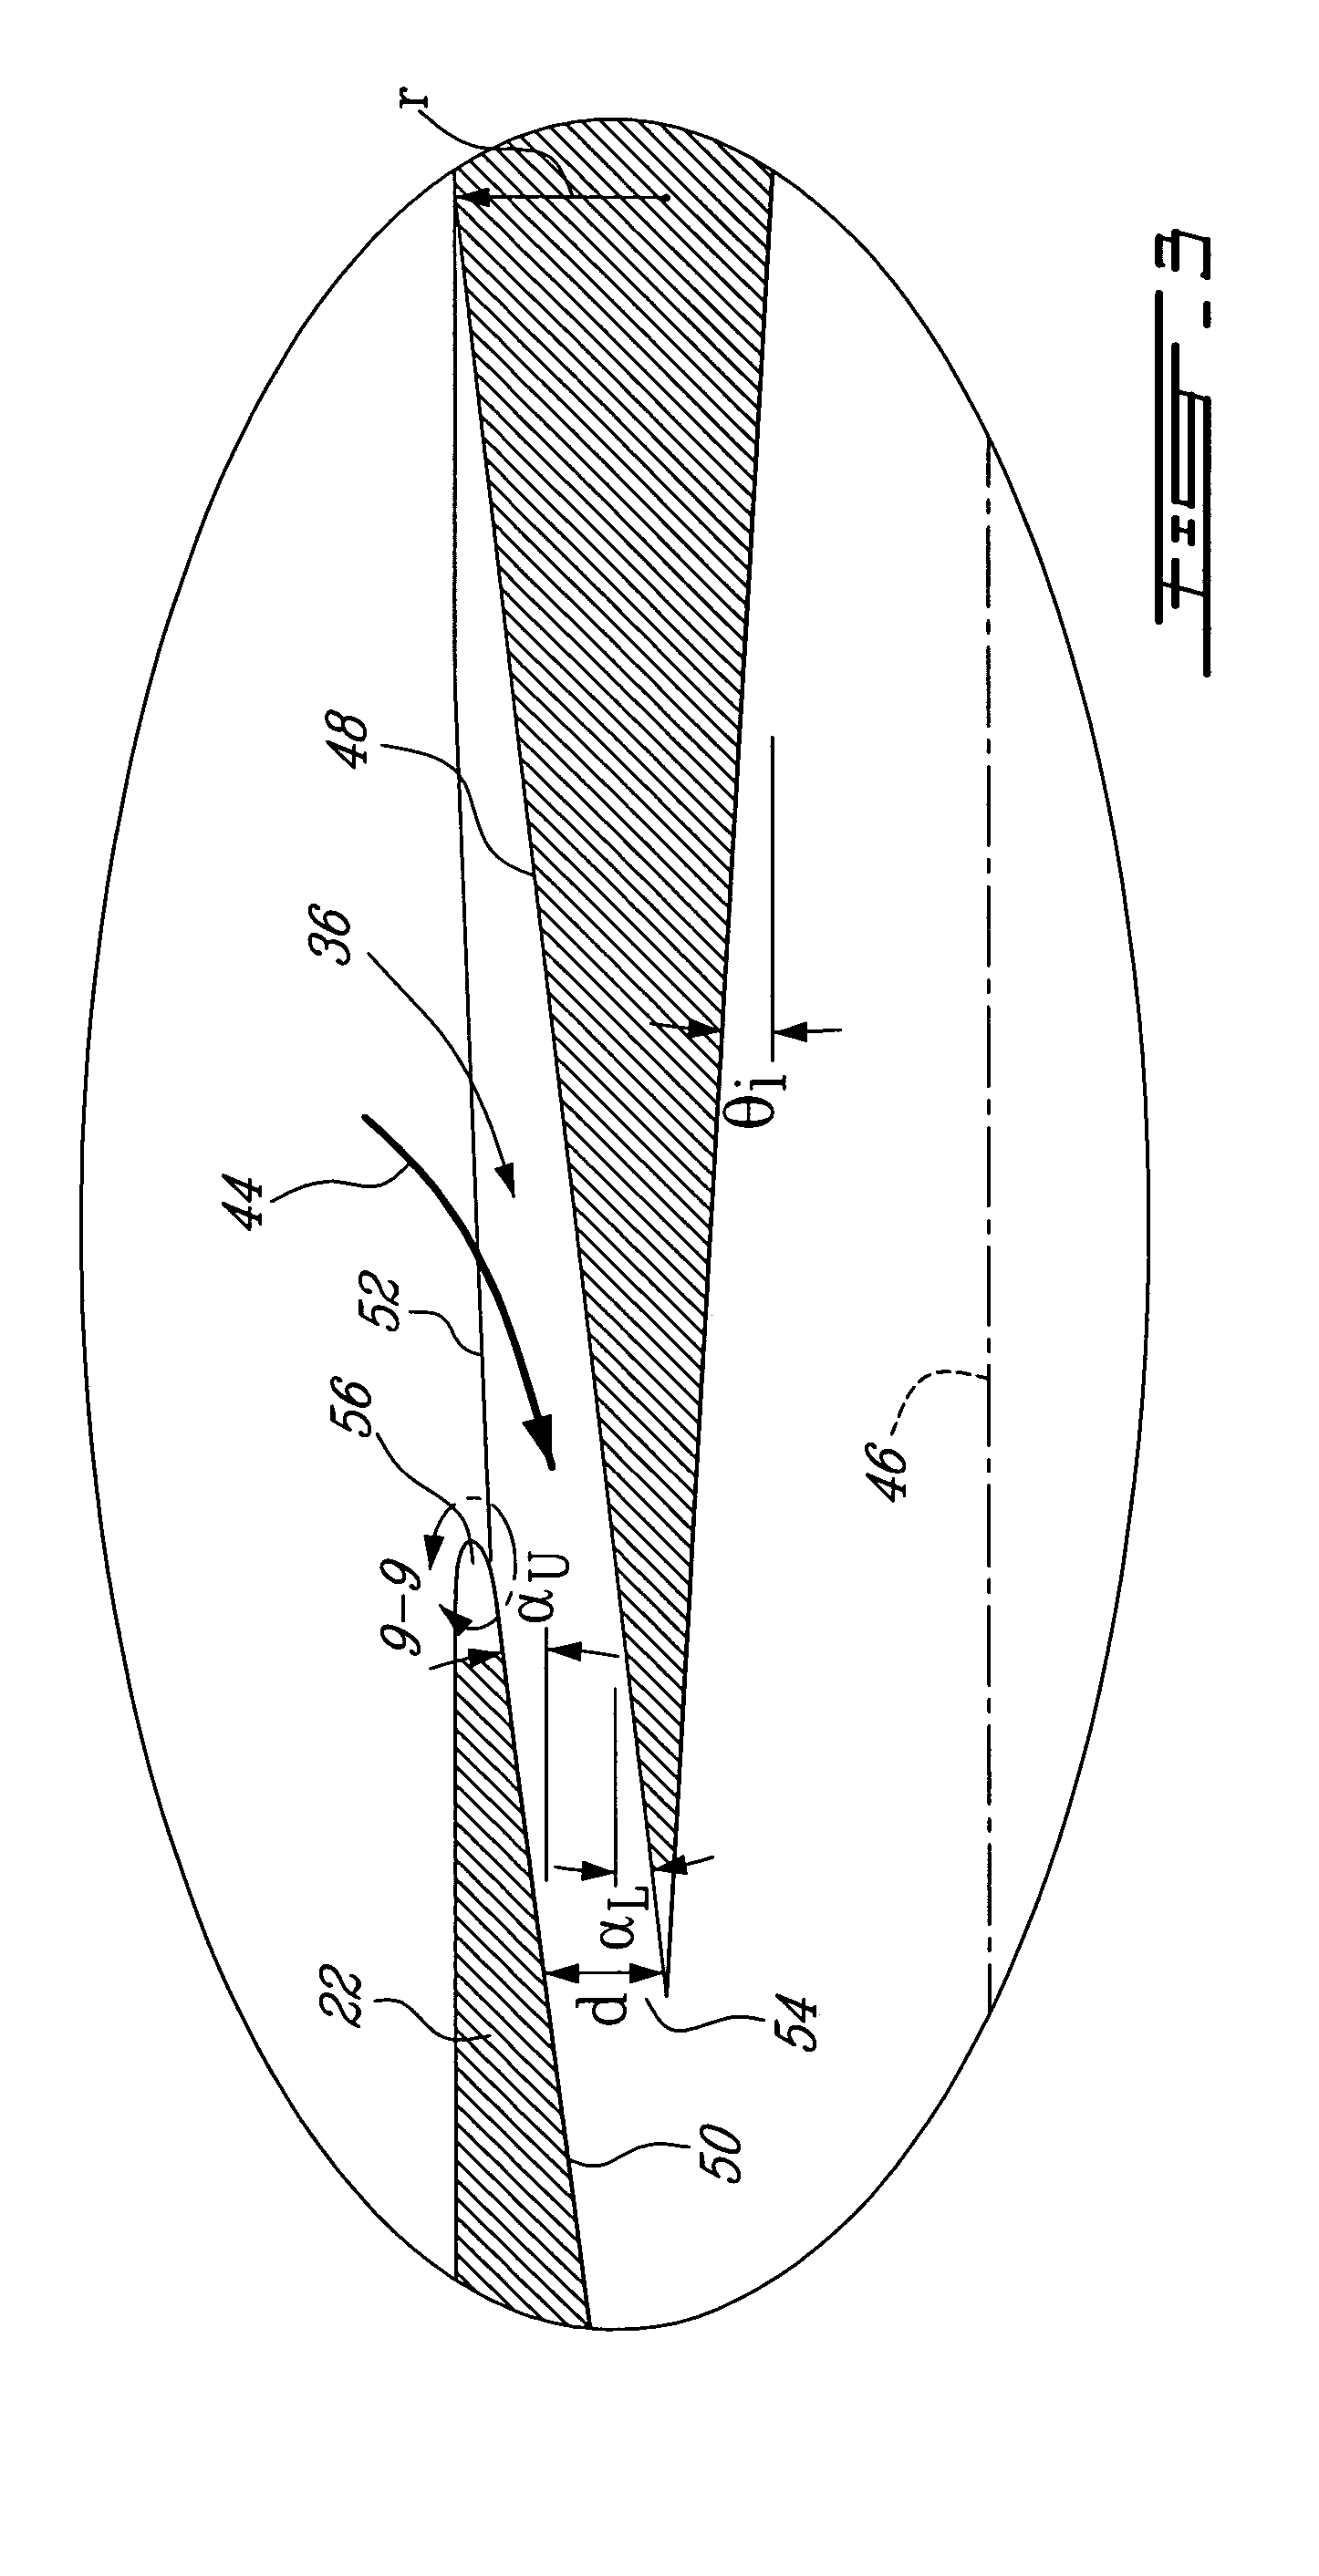 Low-noise vacuum release suction device and controllable aspirator using same